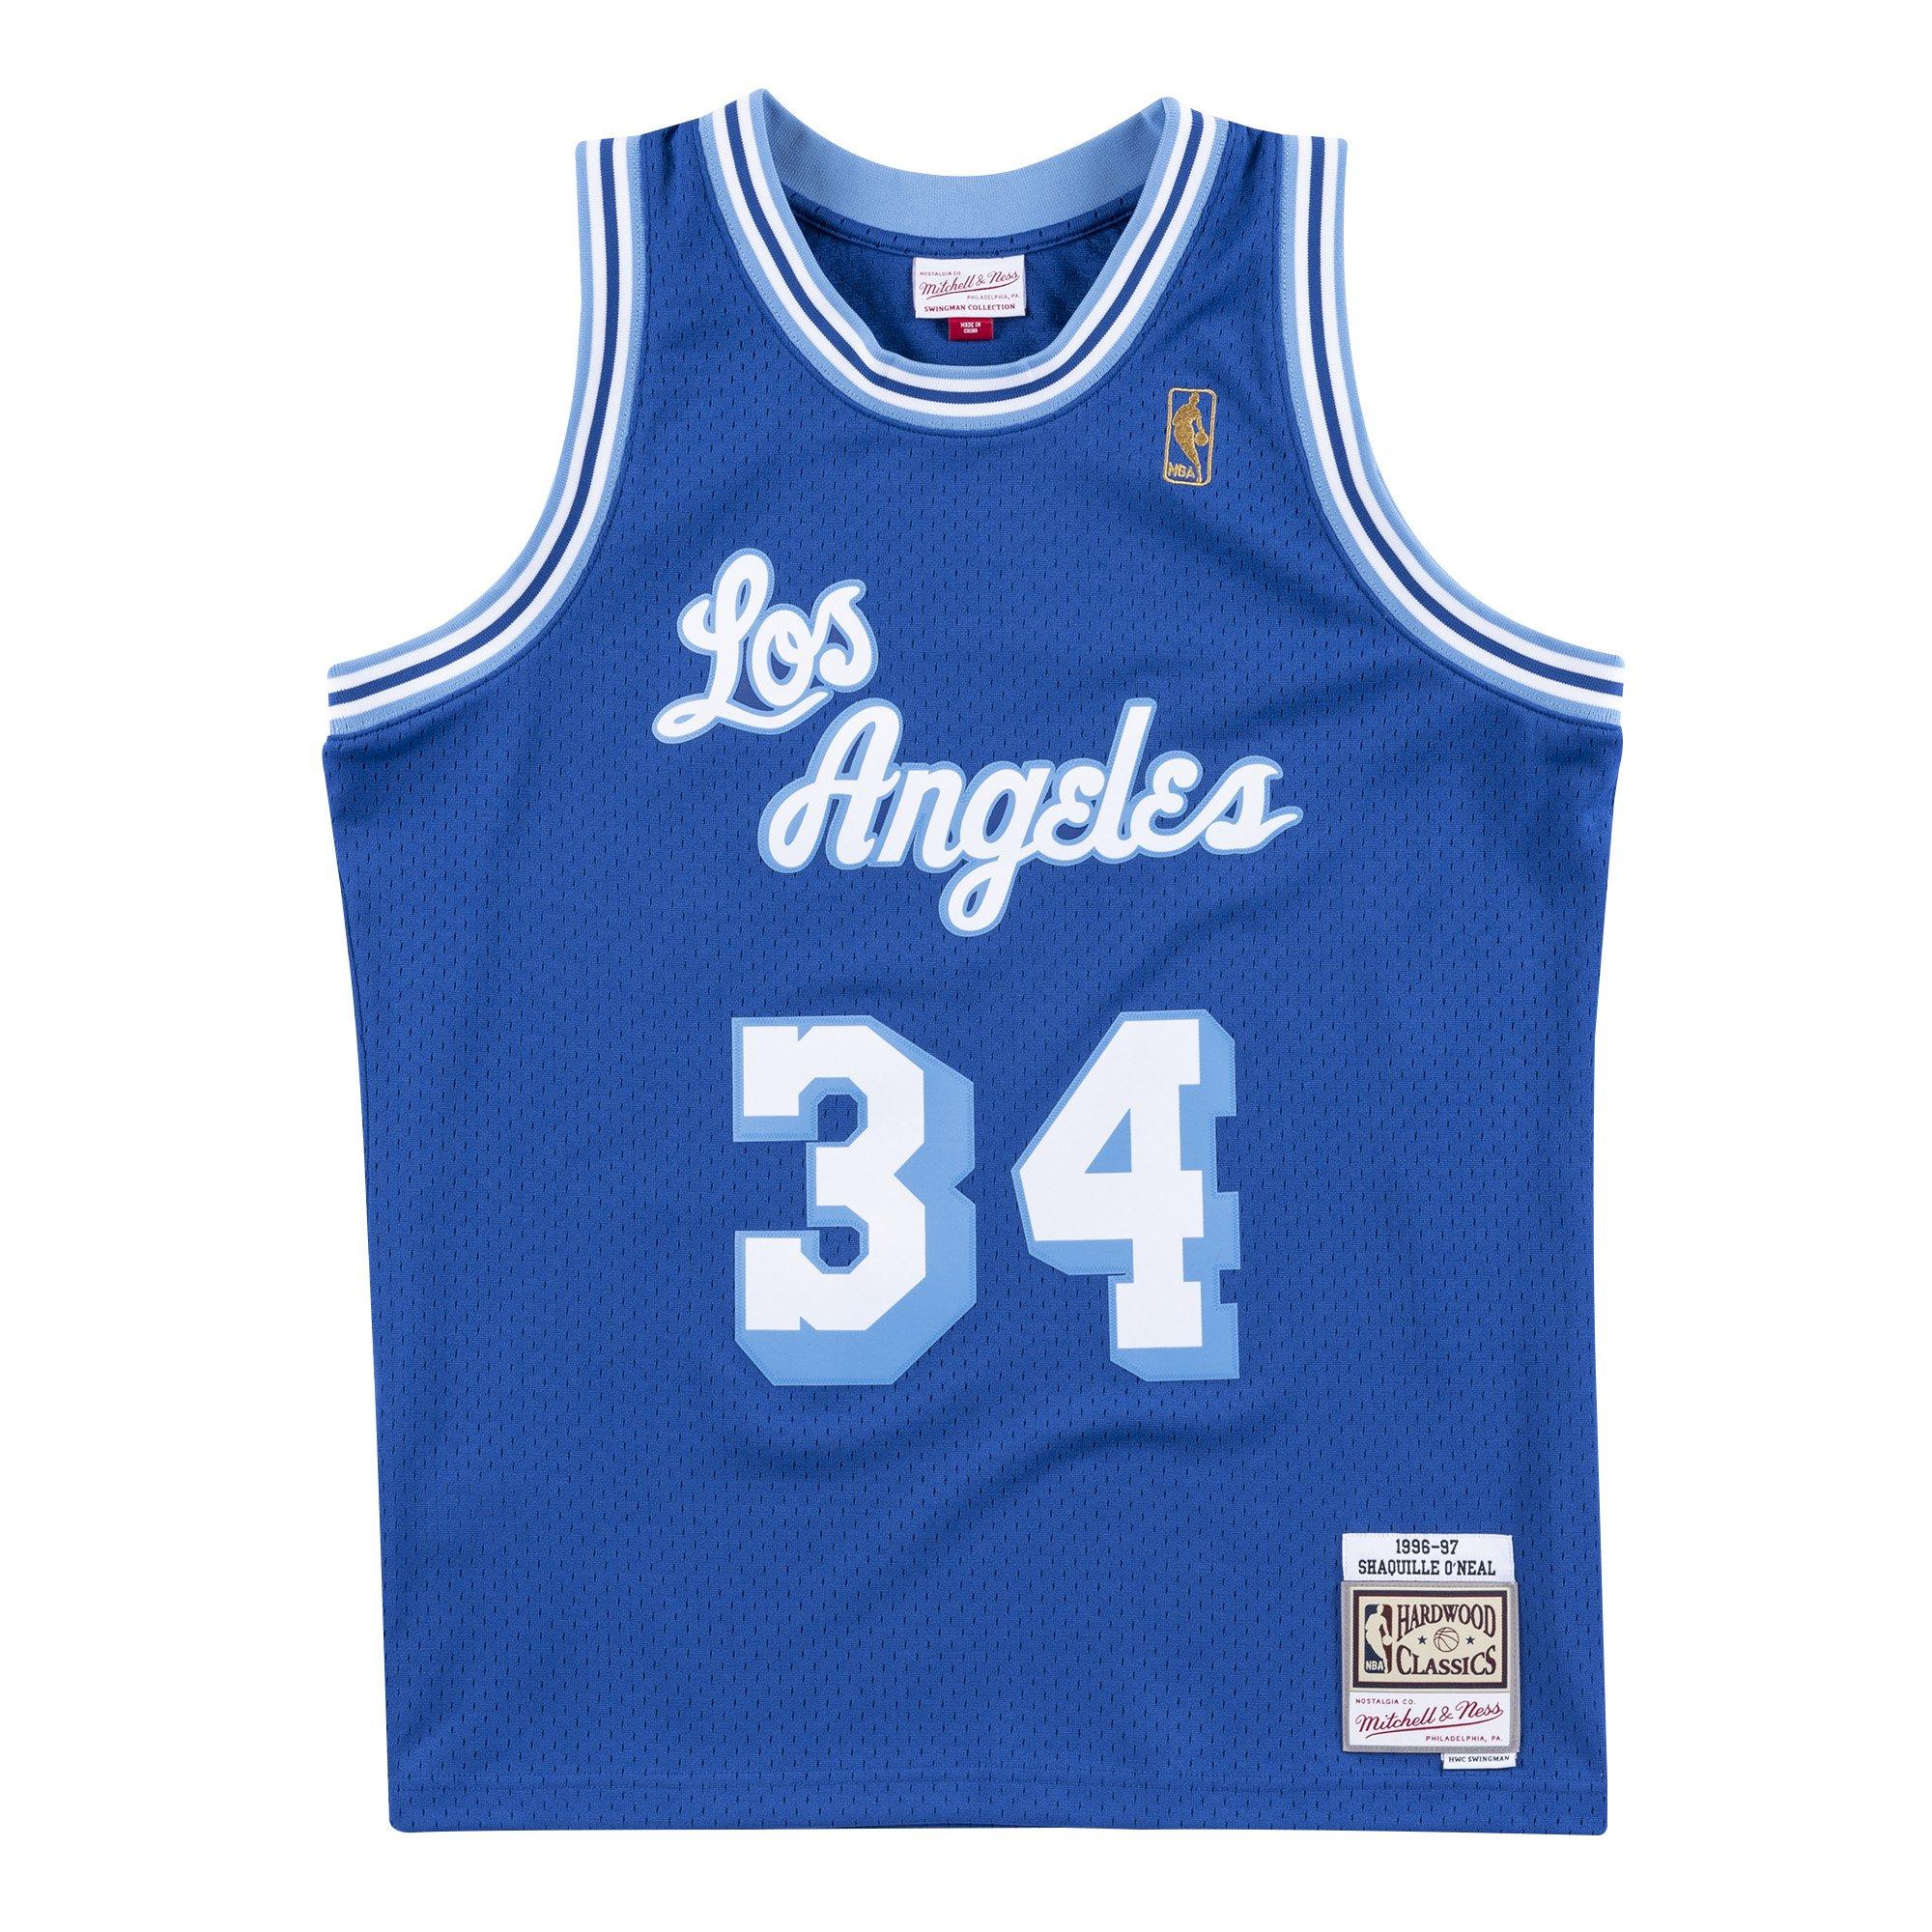 shaq lakers jersey number